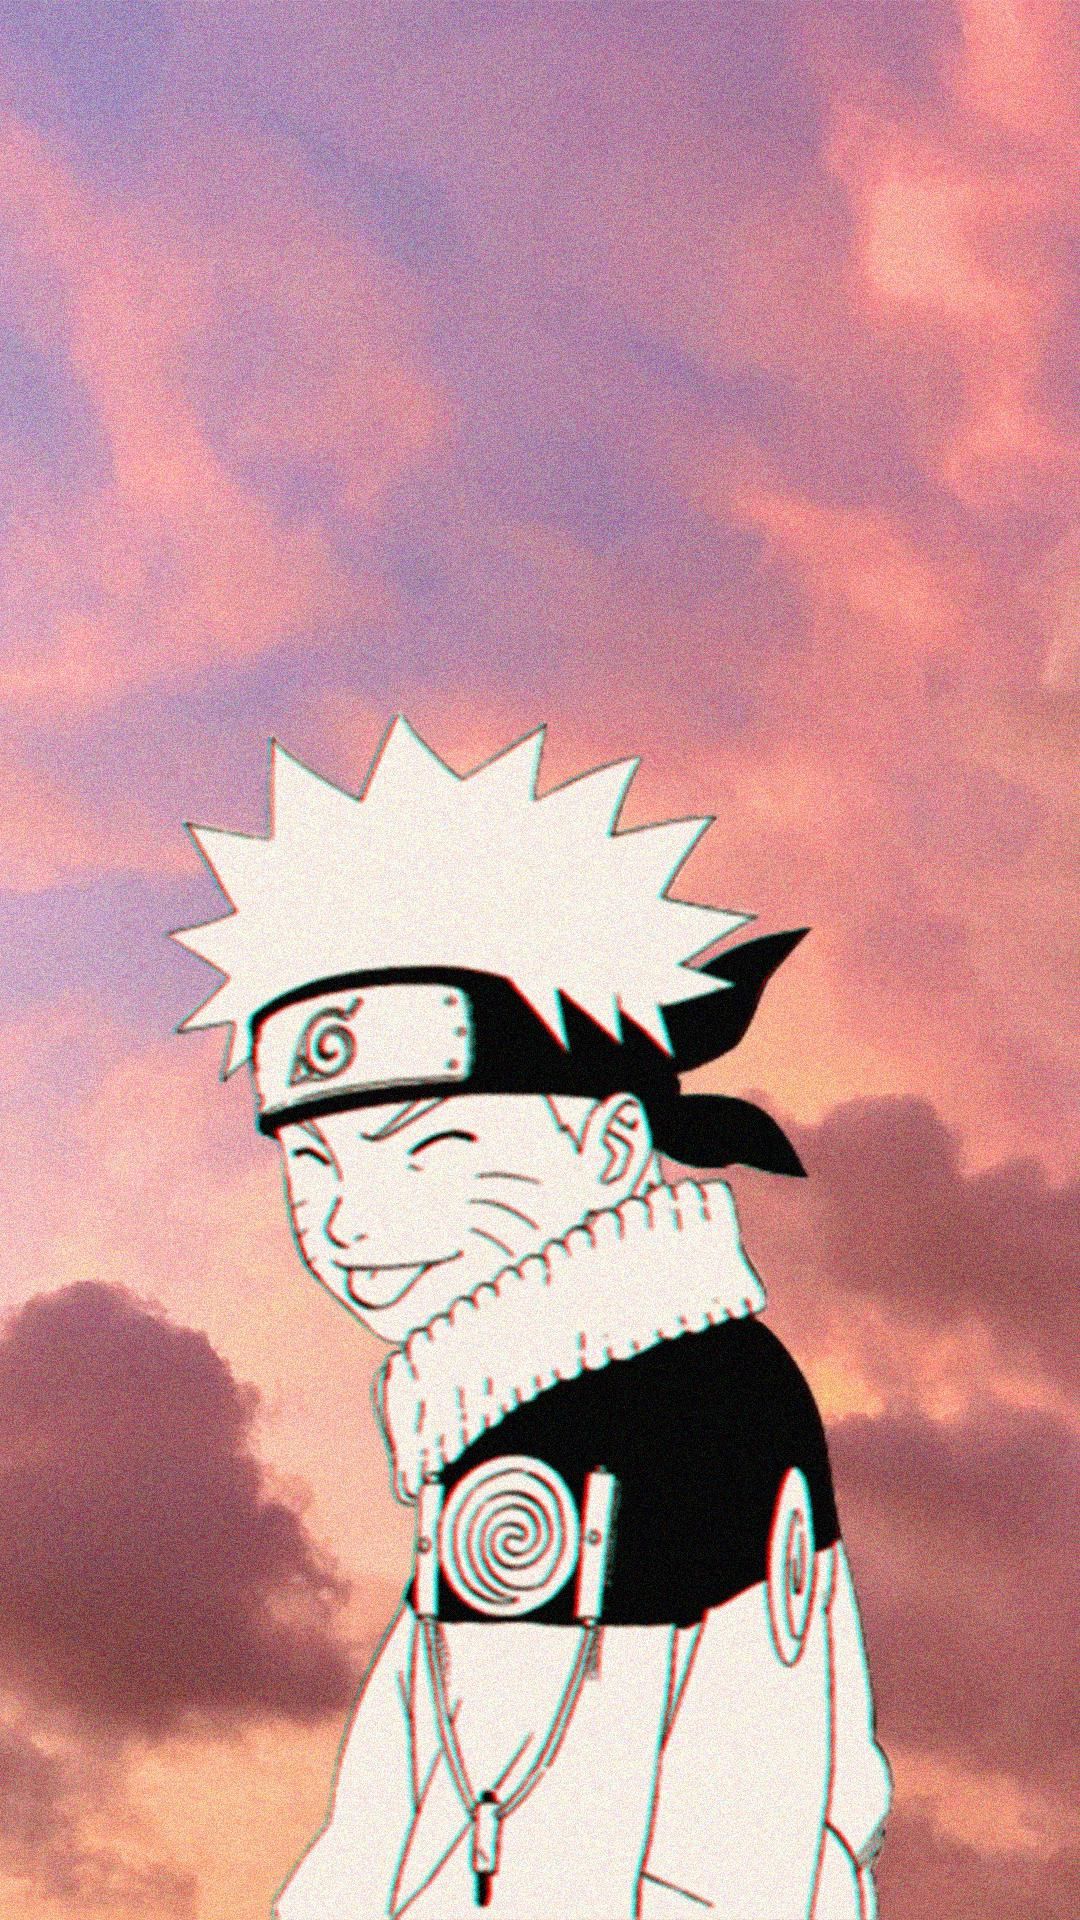 Aesthetic Anime Naruto Pfp Discord - Go Images Cafe